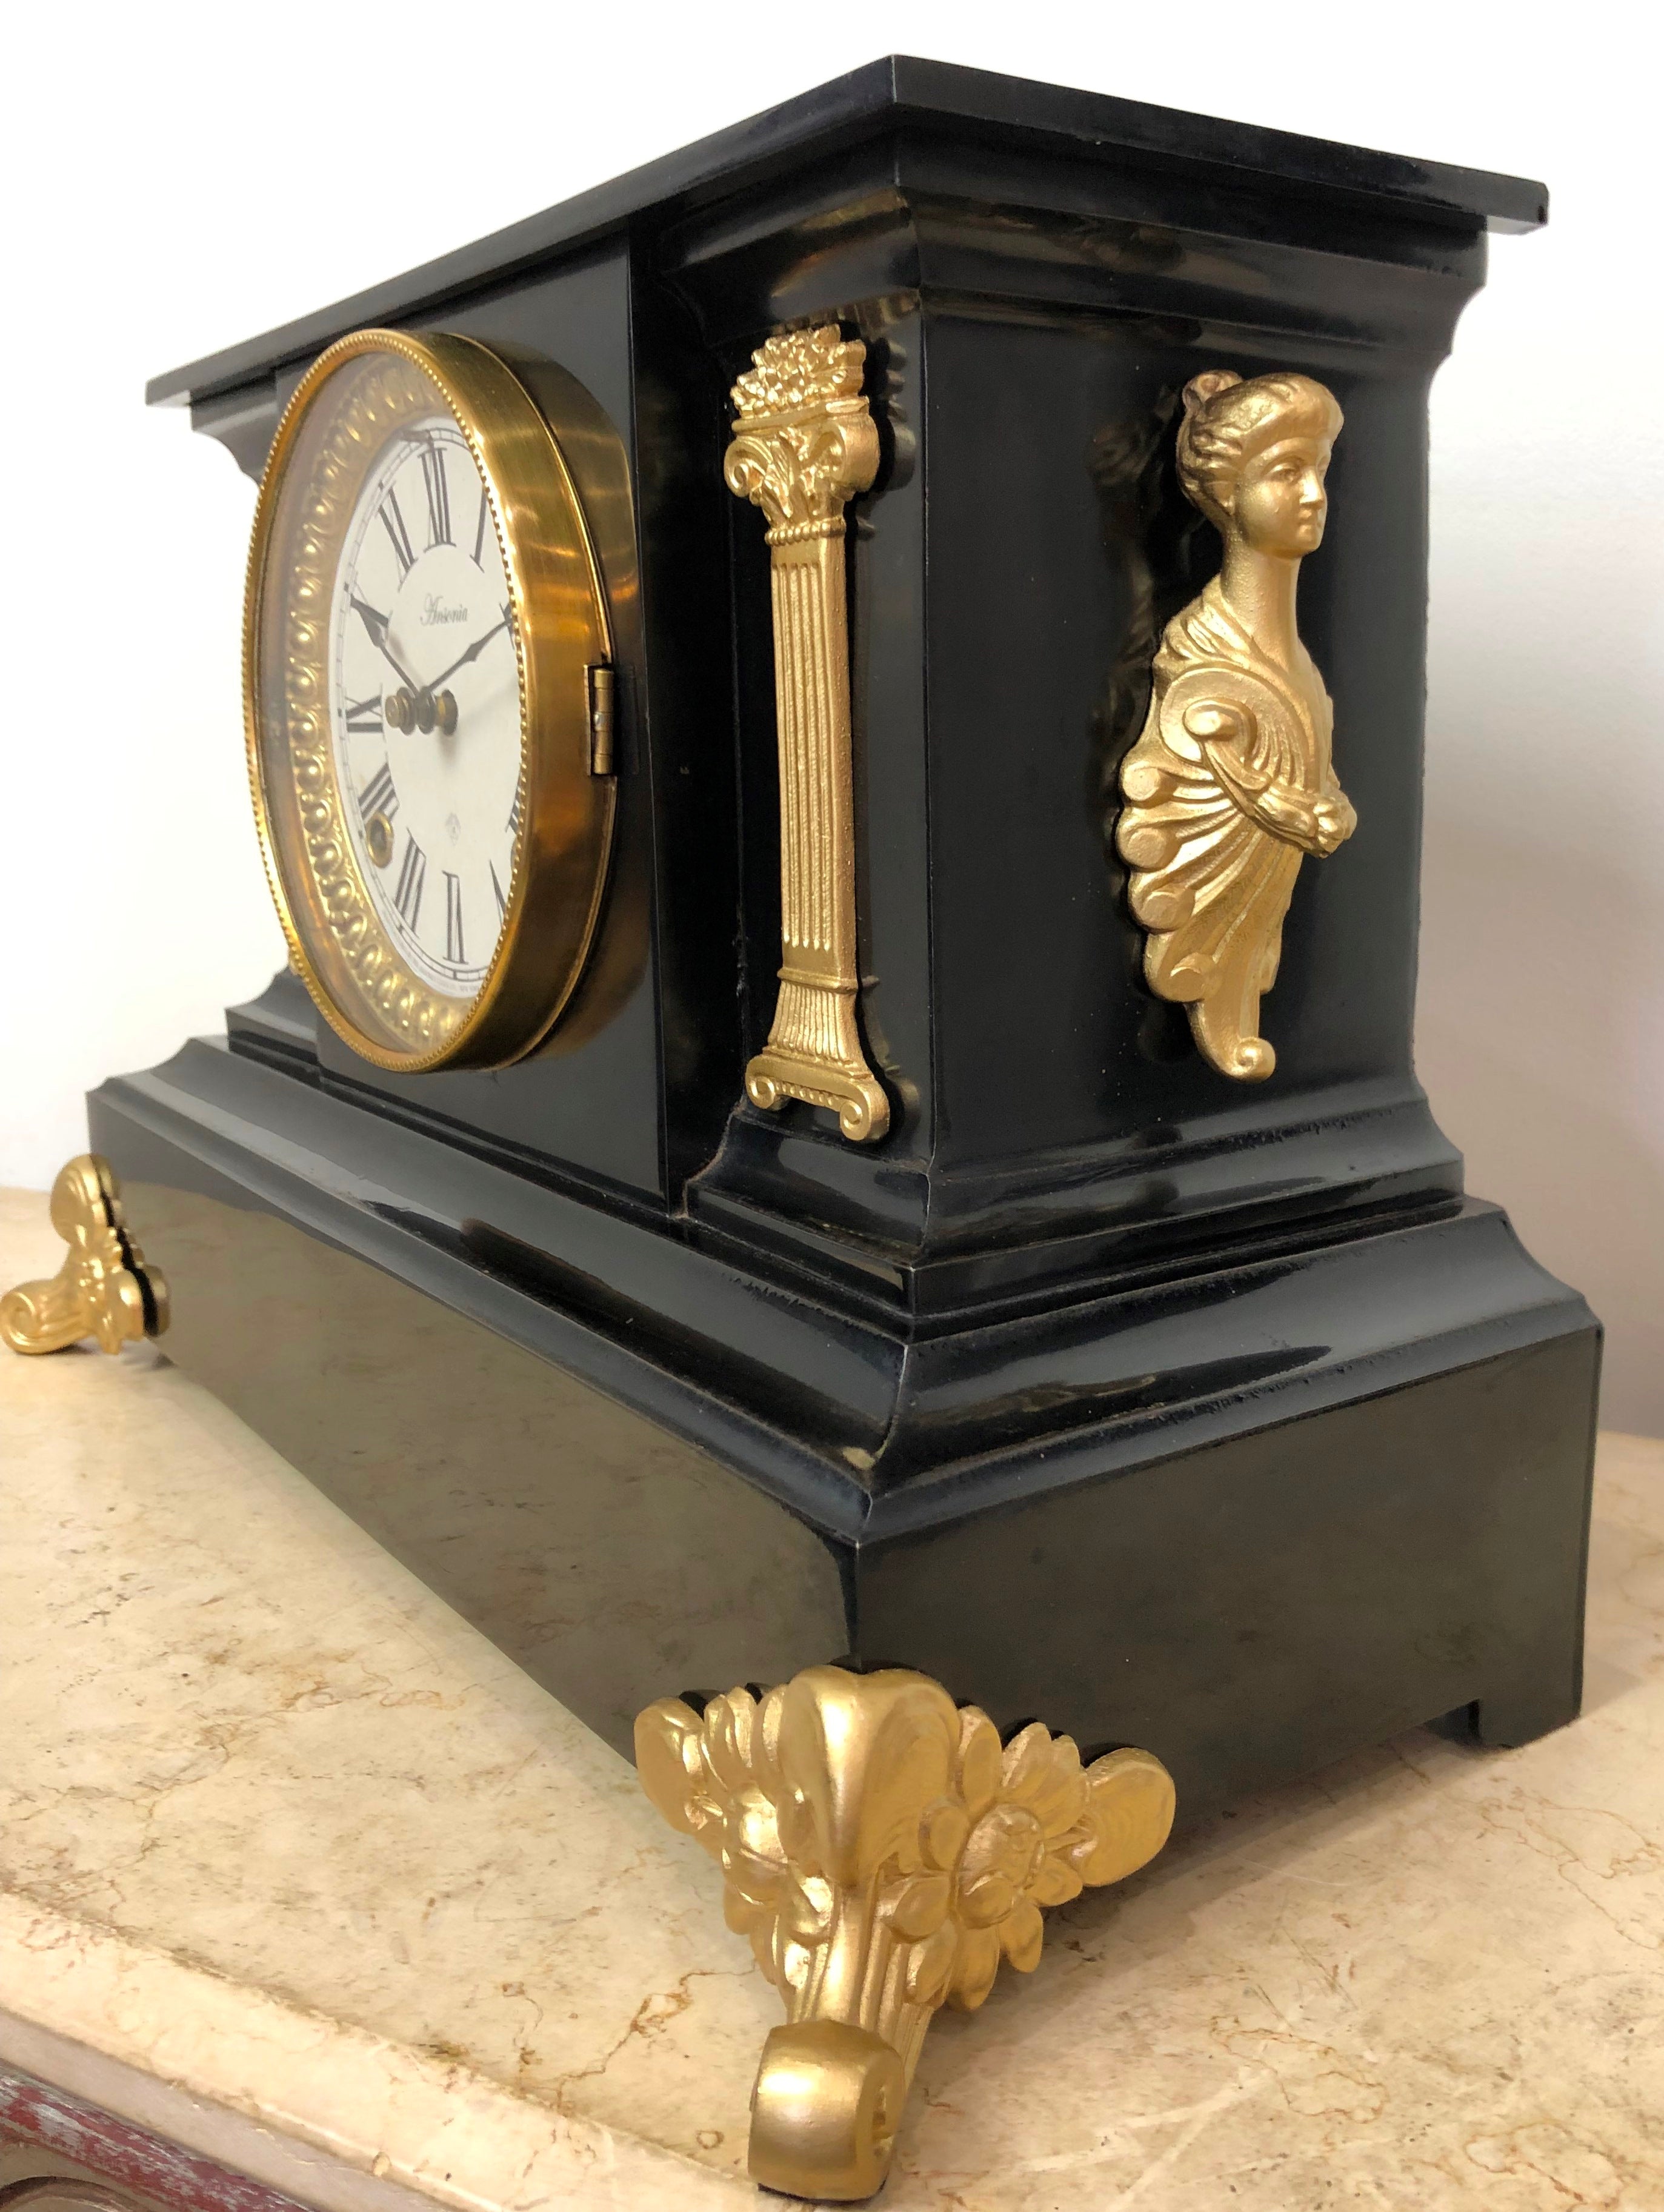 Antique Cast Iron Ansonia Hammer on Coil Chime Mantel Clock - eXibit collection